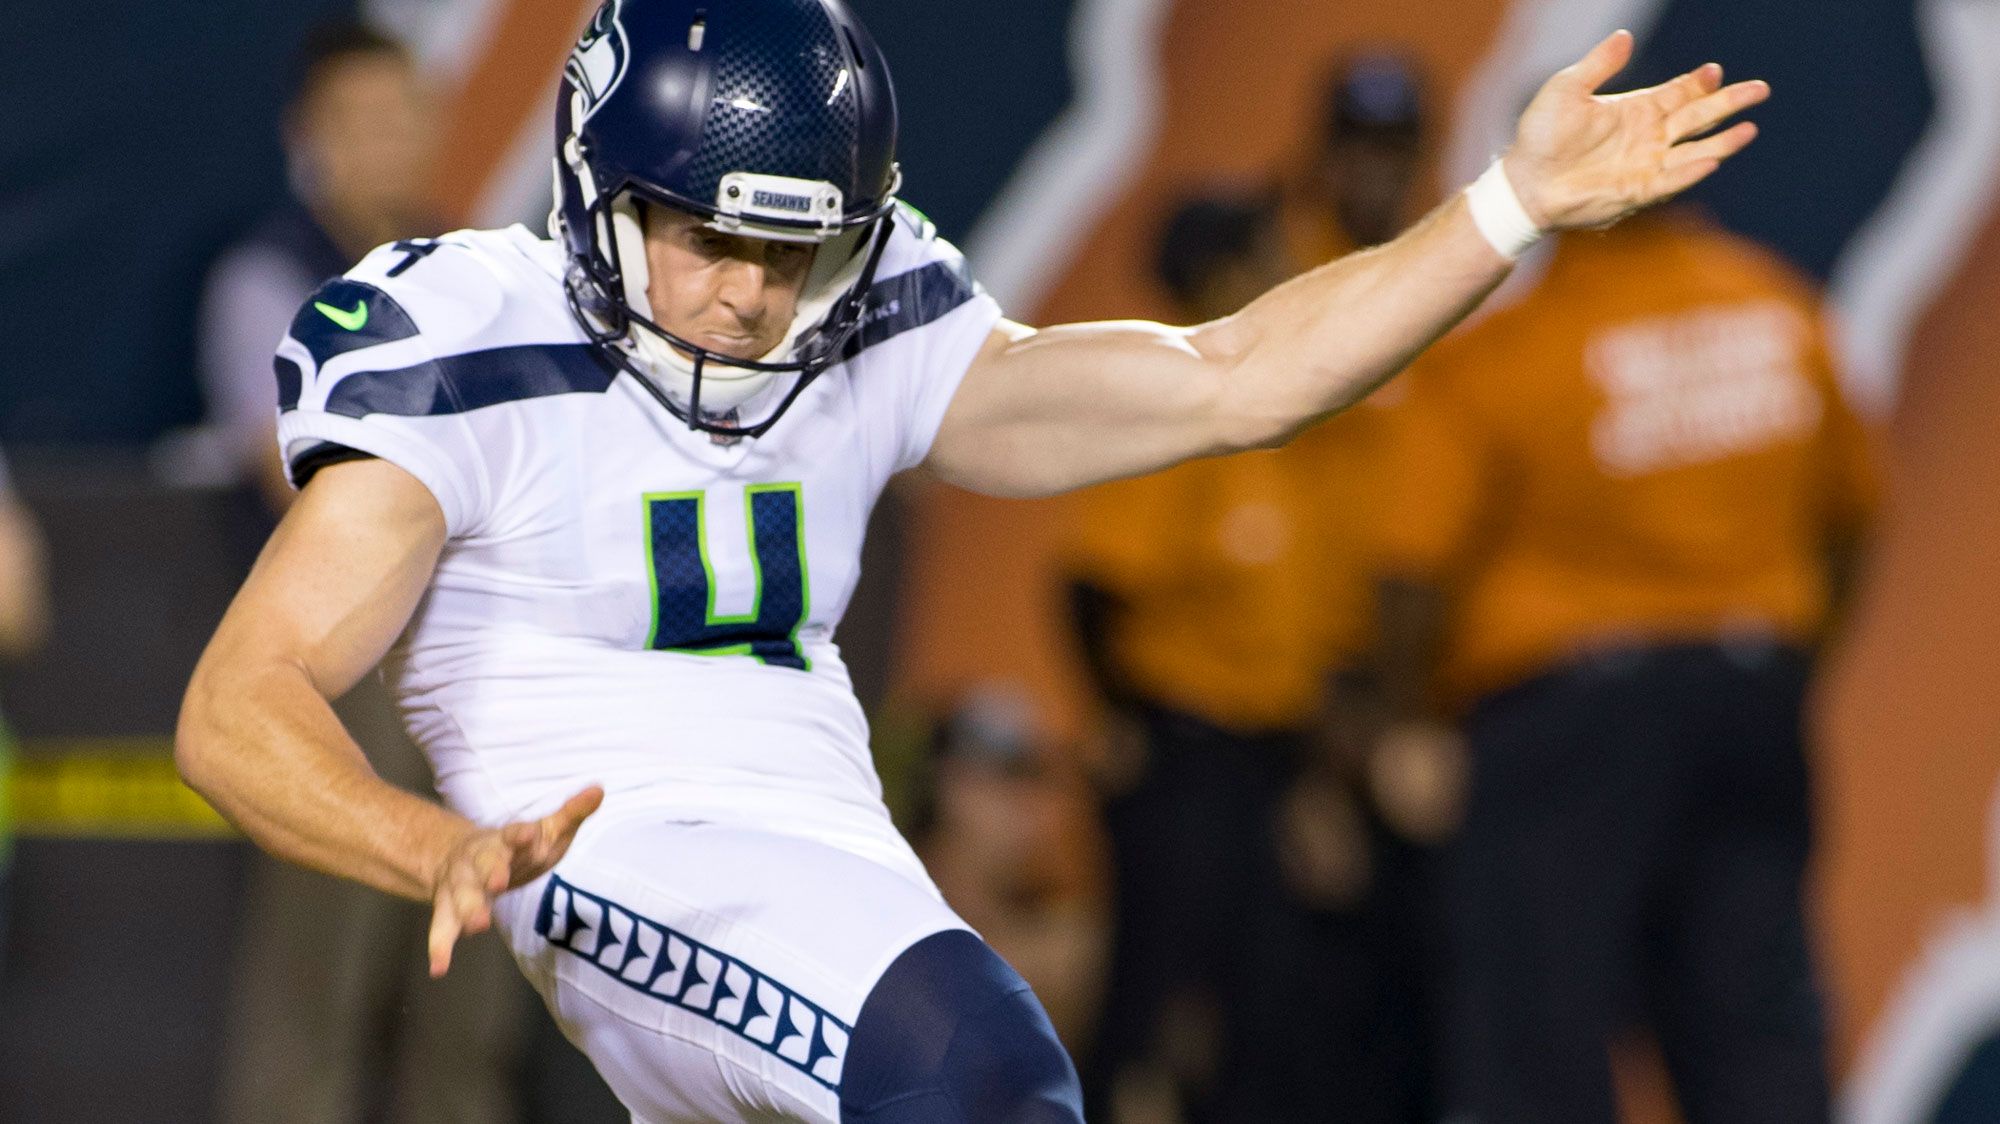 Aussie punter Michael Dickson thriving in the NFL with Seattle Seahawks